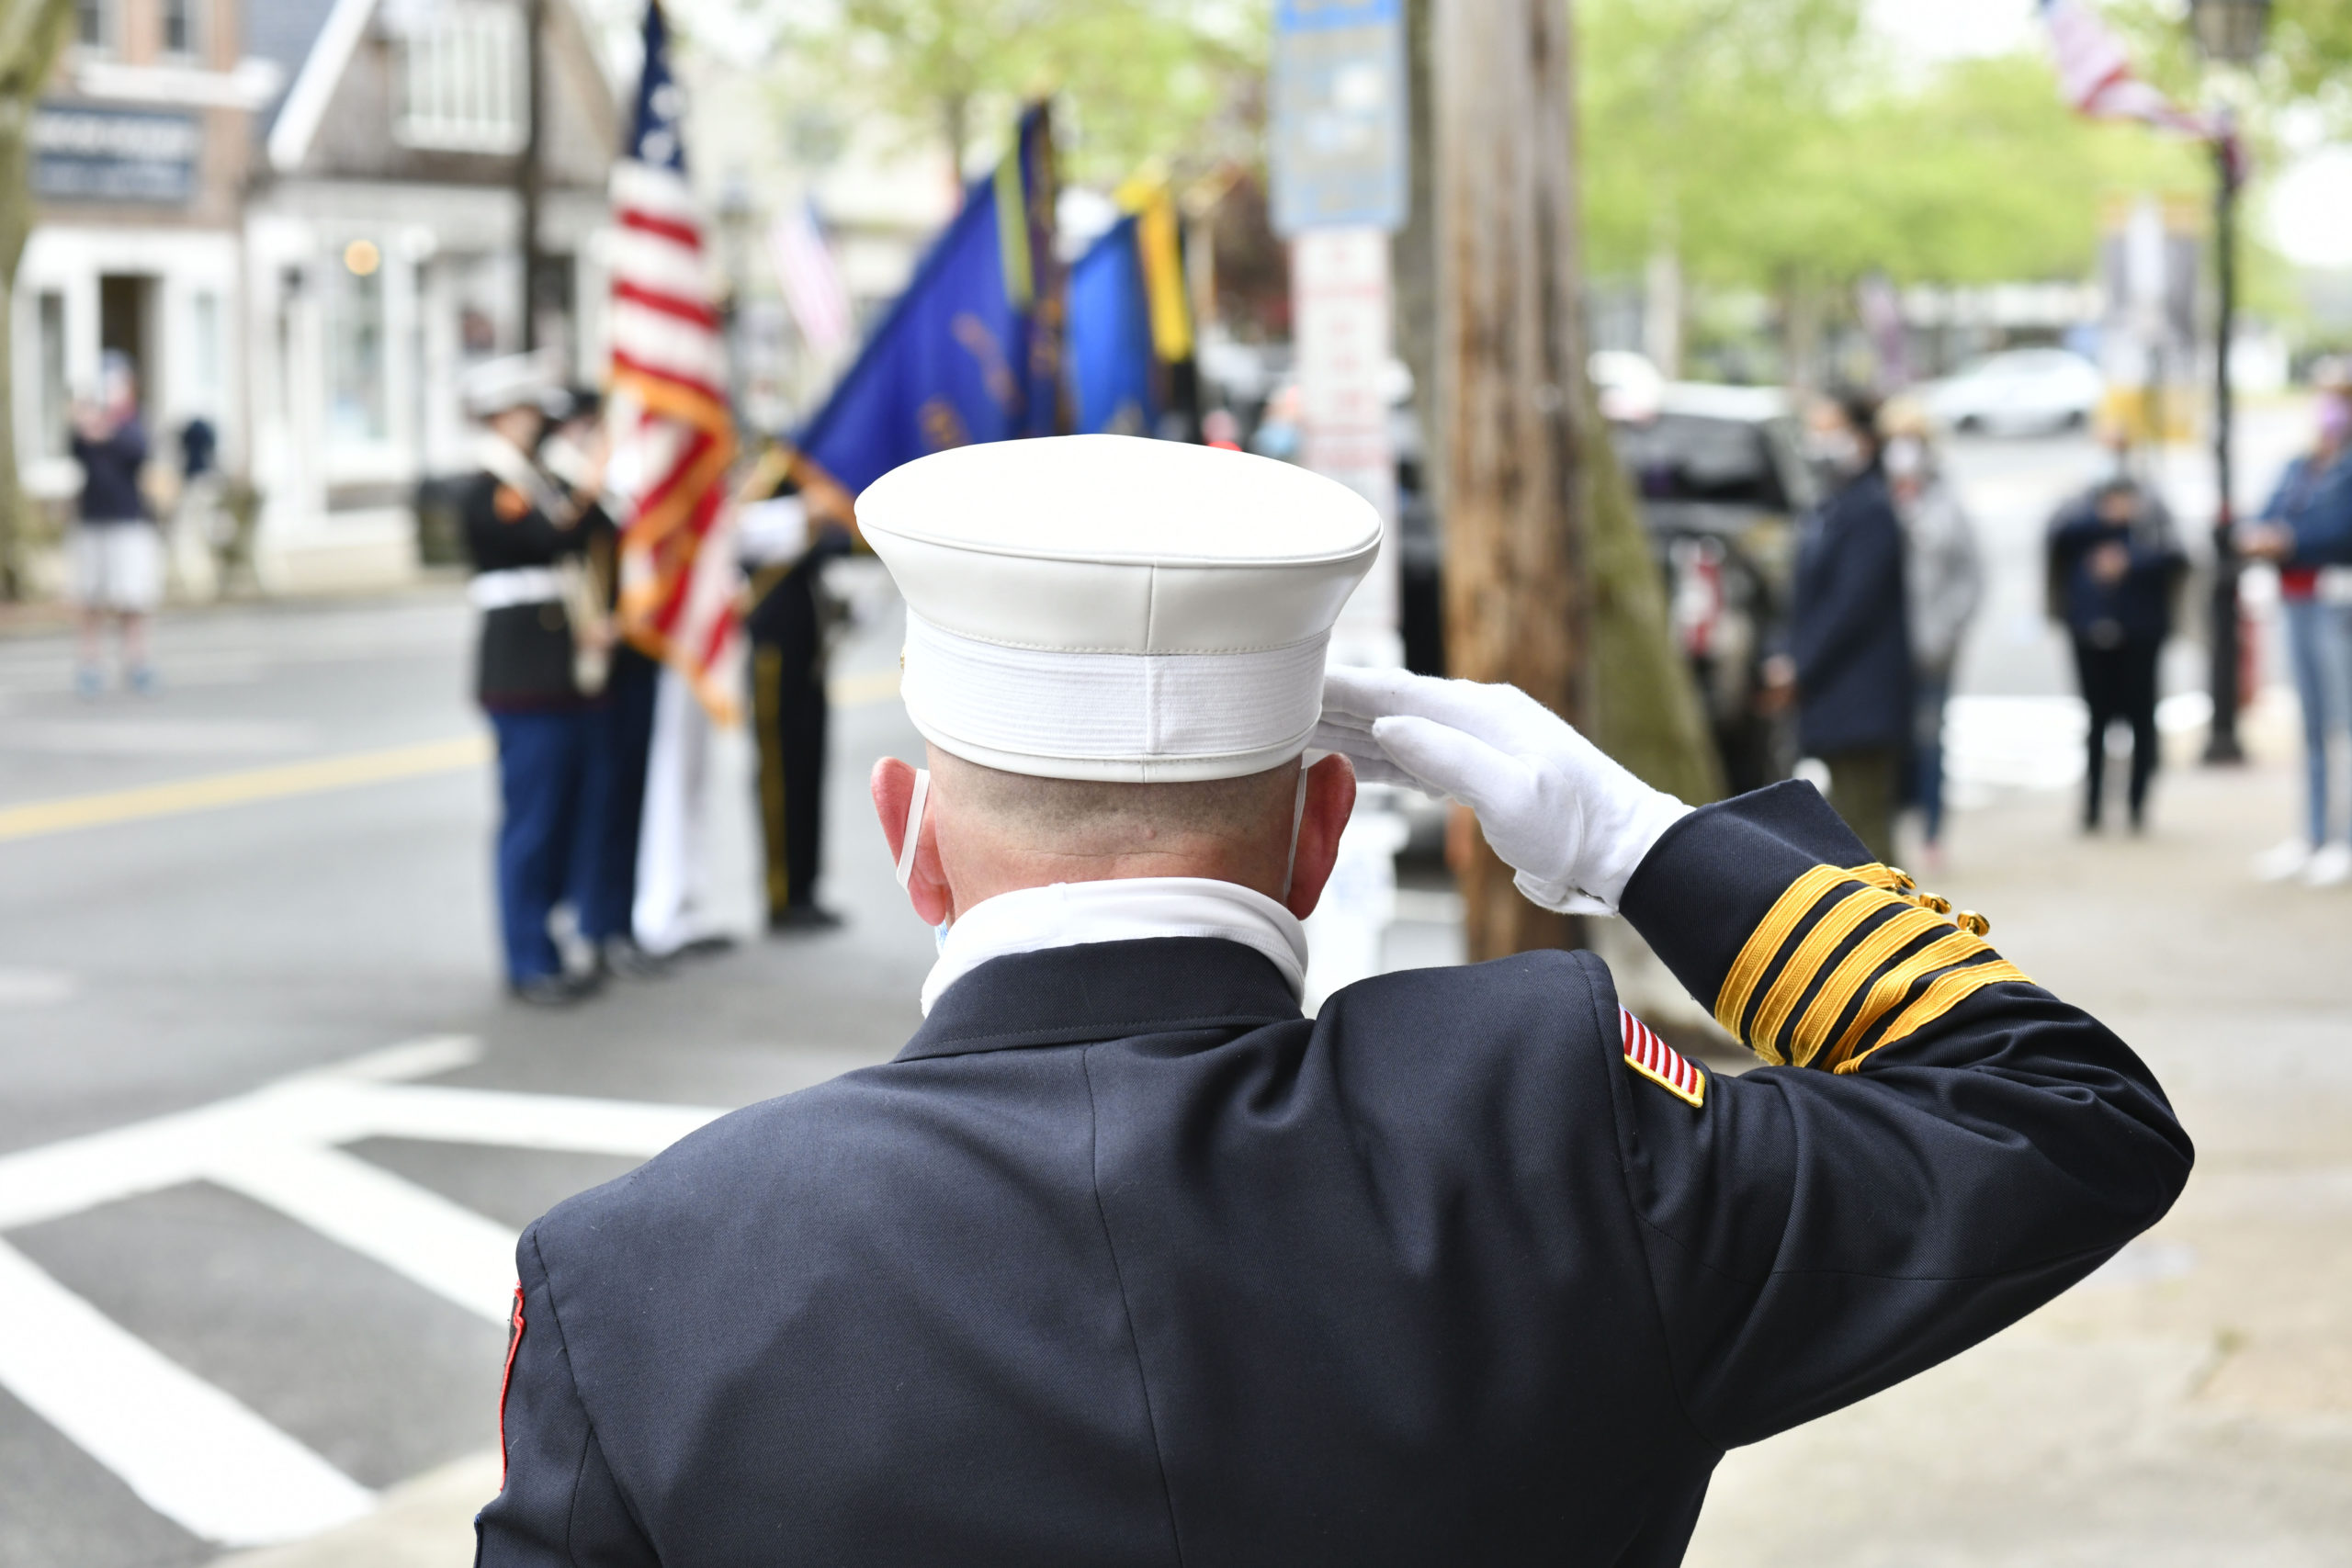 Memorial Day observances in Sag Harbor on Monday.